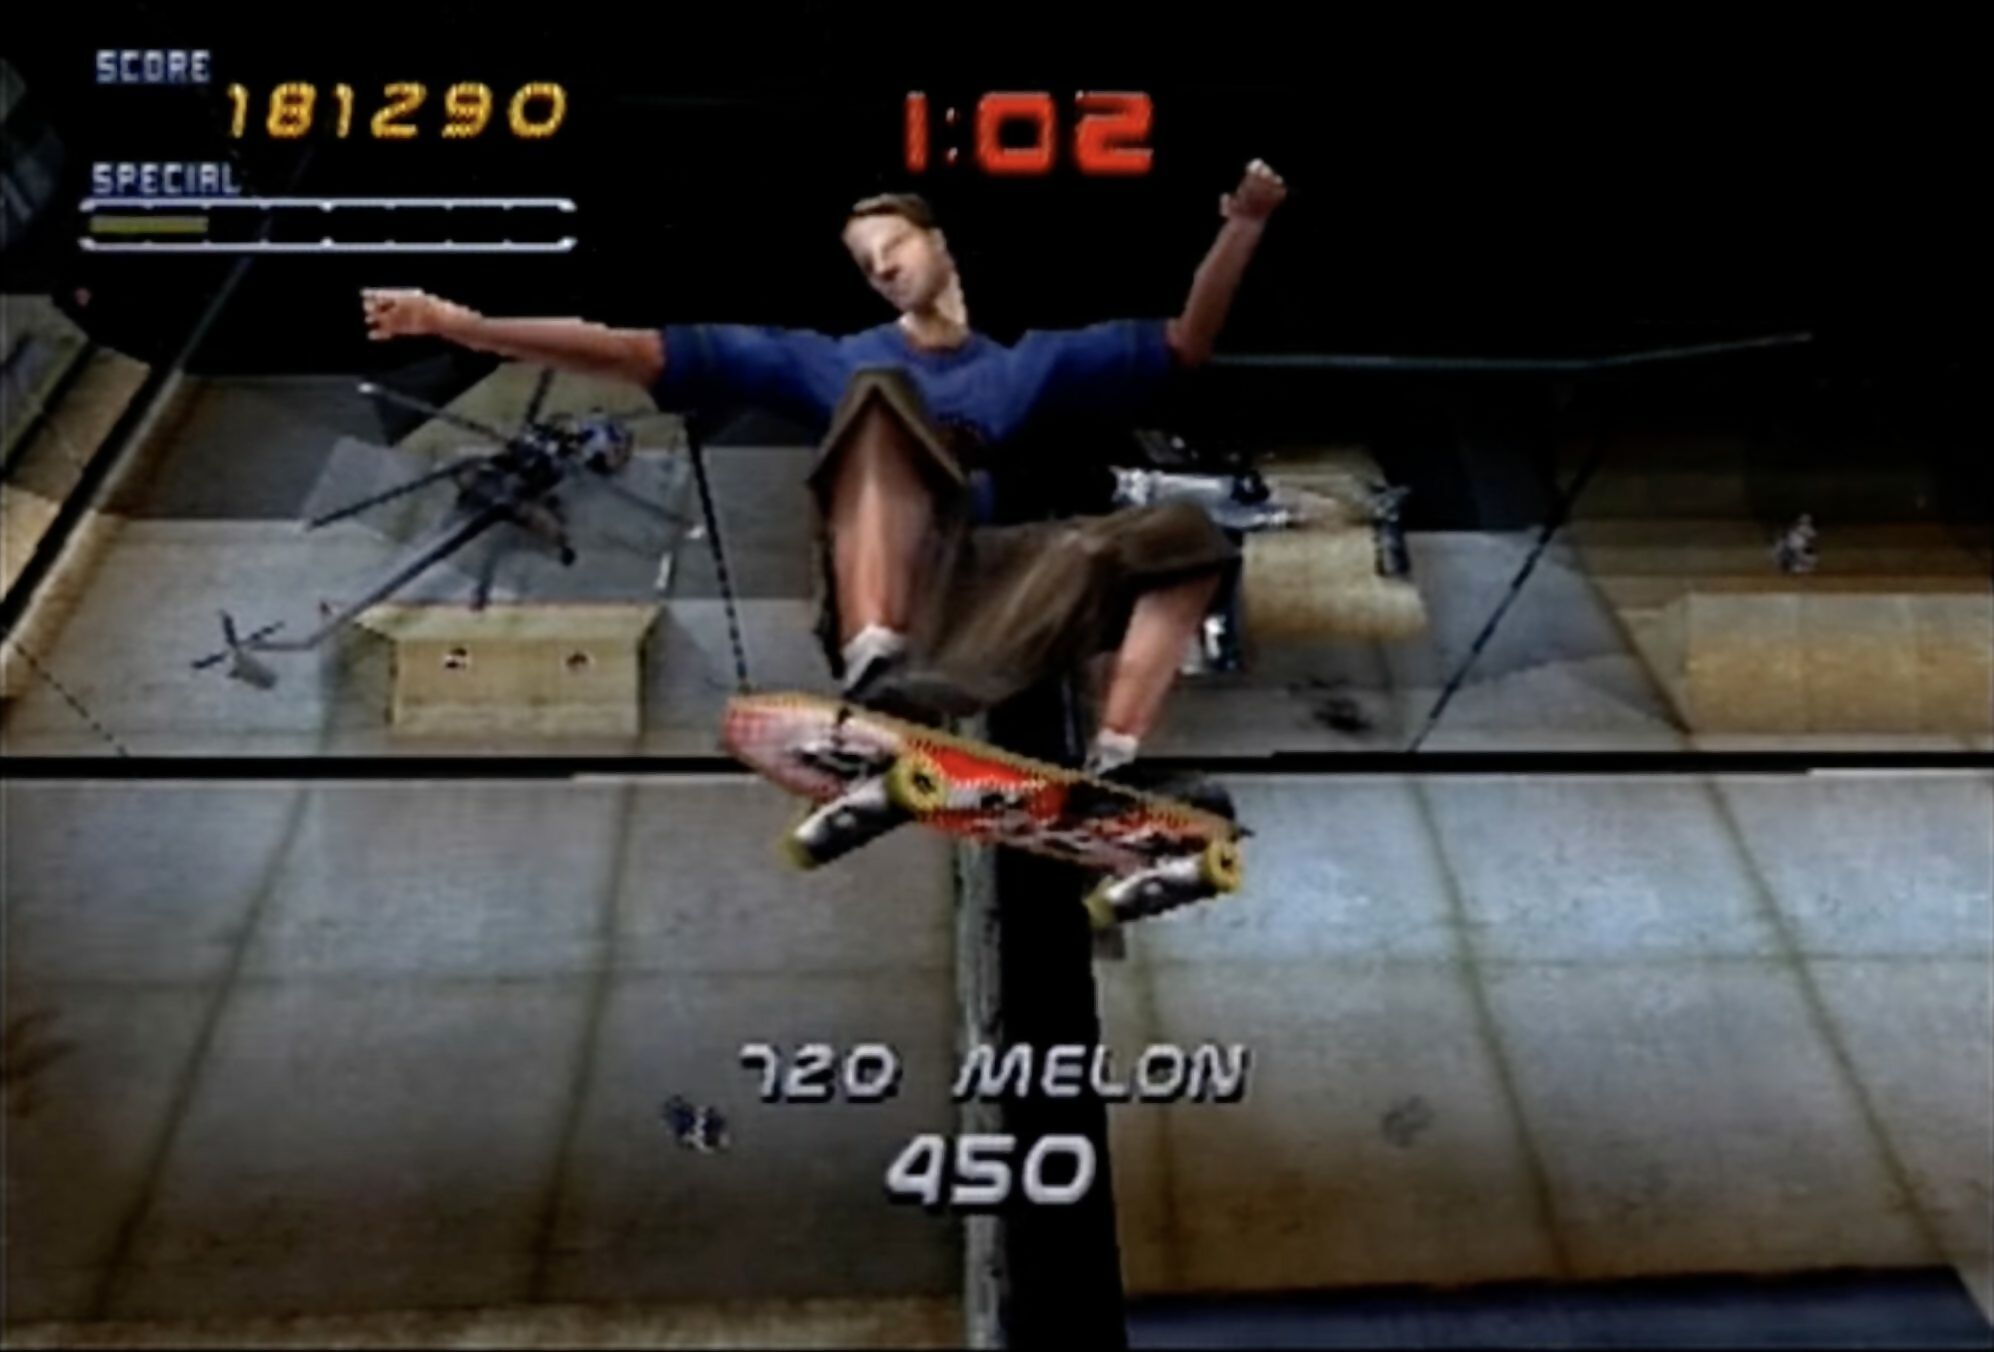 Tony Hawk's Pro Skater 3 Review for PlayStation 2: - GameFAQs